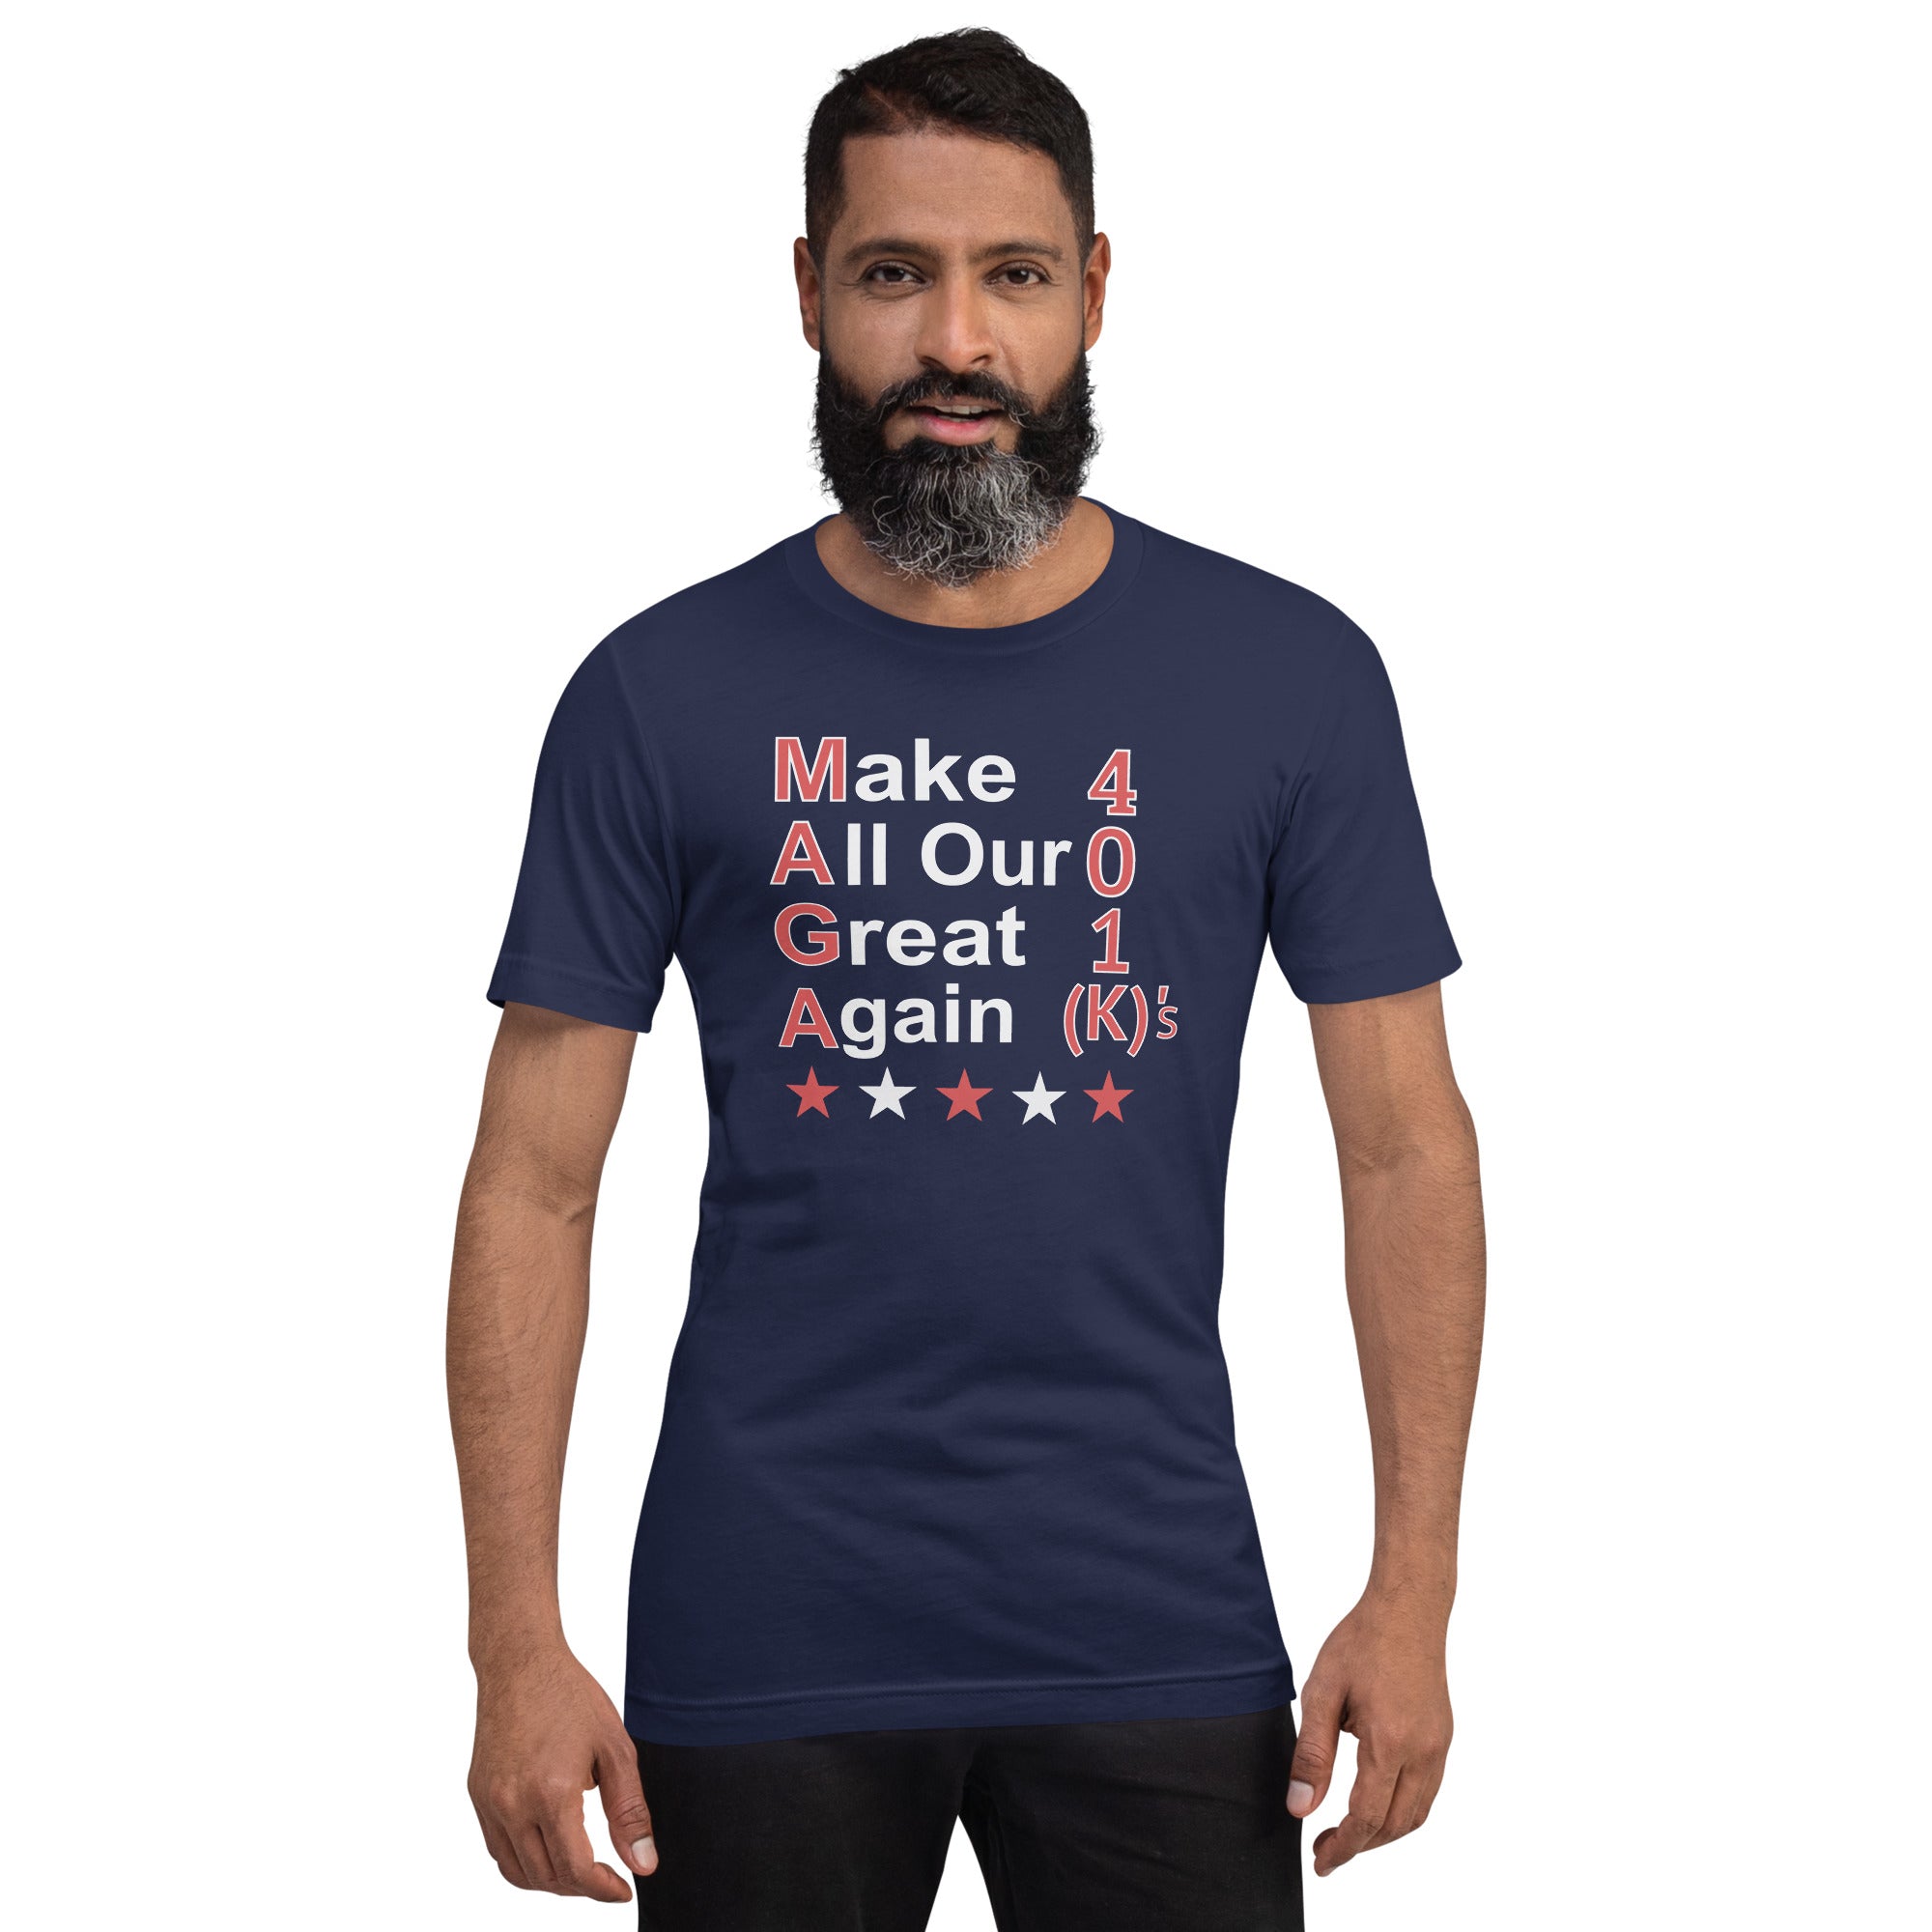 MAGA Make All Our 401k's Great Again T-Shirt For Trump Republican Supporters